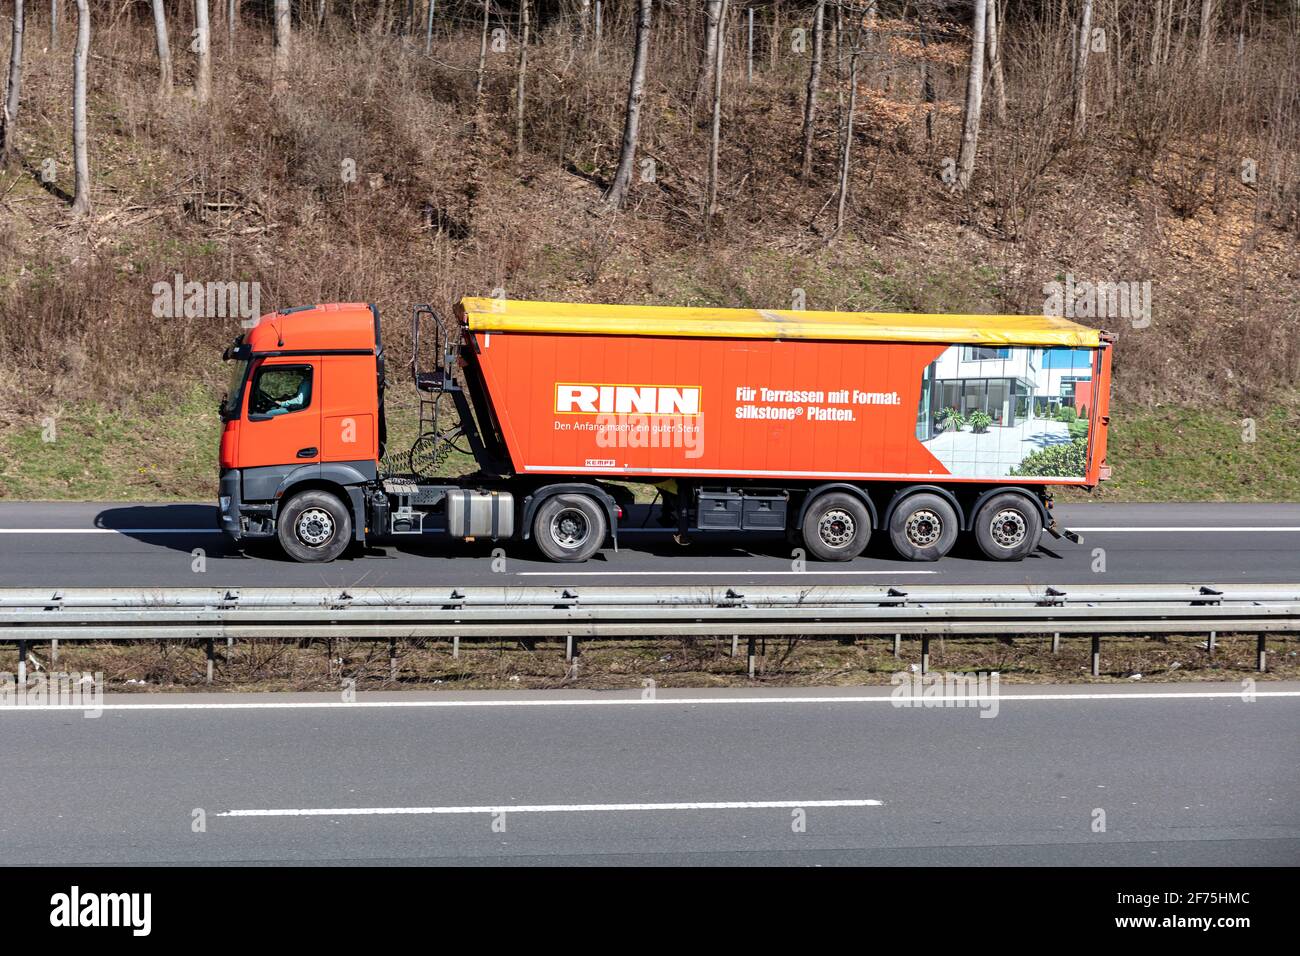 Rinn Mercedes-Benz truck with tipper trailer on motorway. Stock Photo